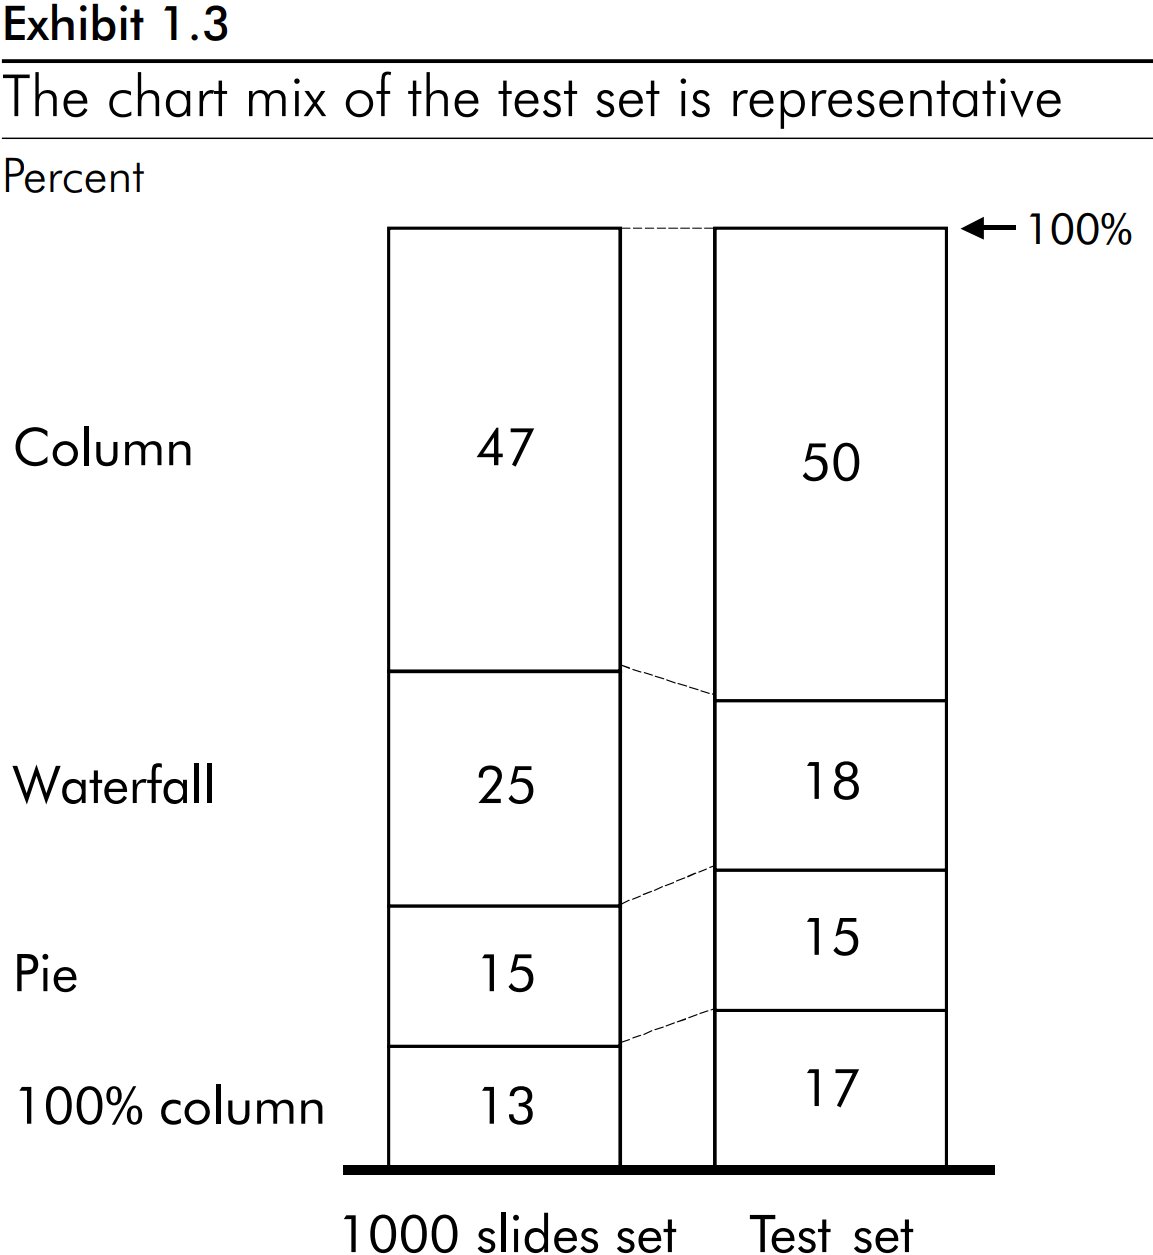 Stacked column chart showing that the chart mix of the test set is representative.